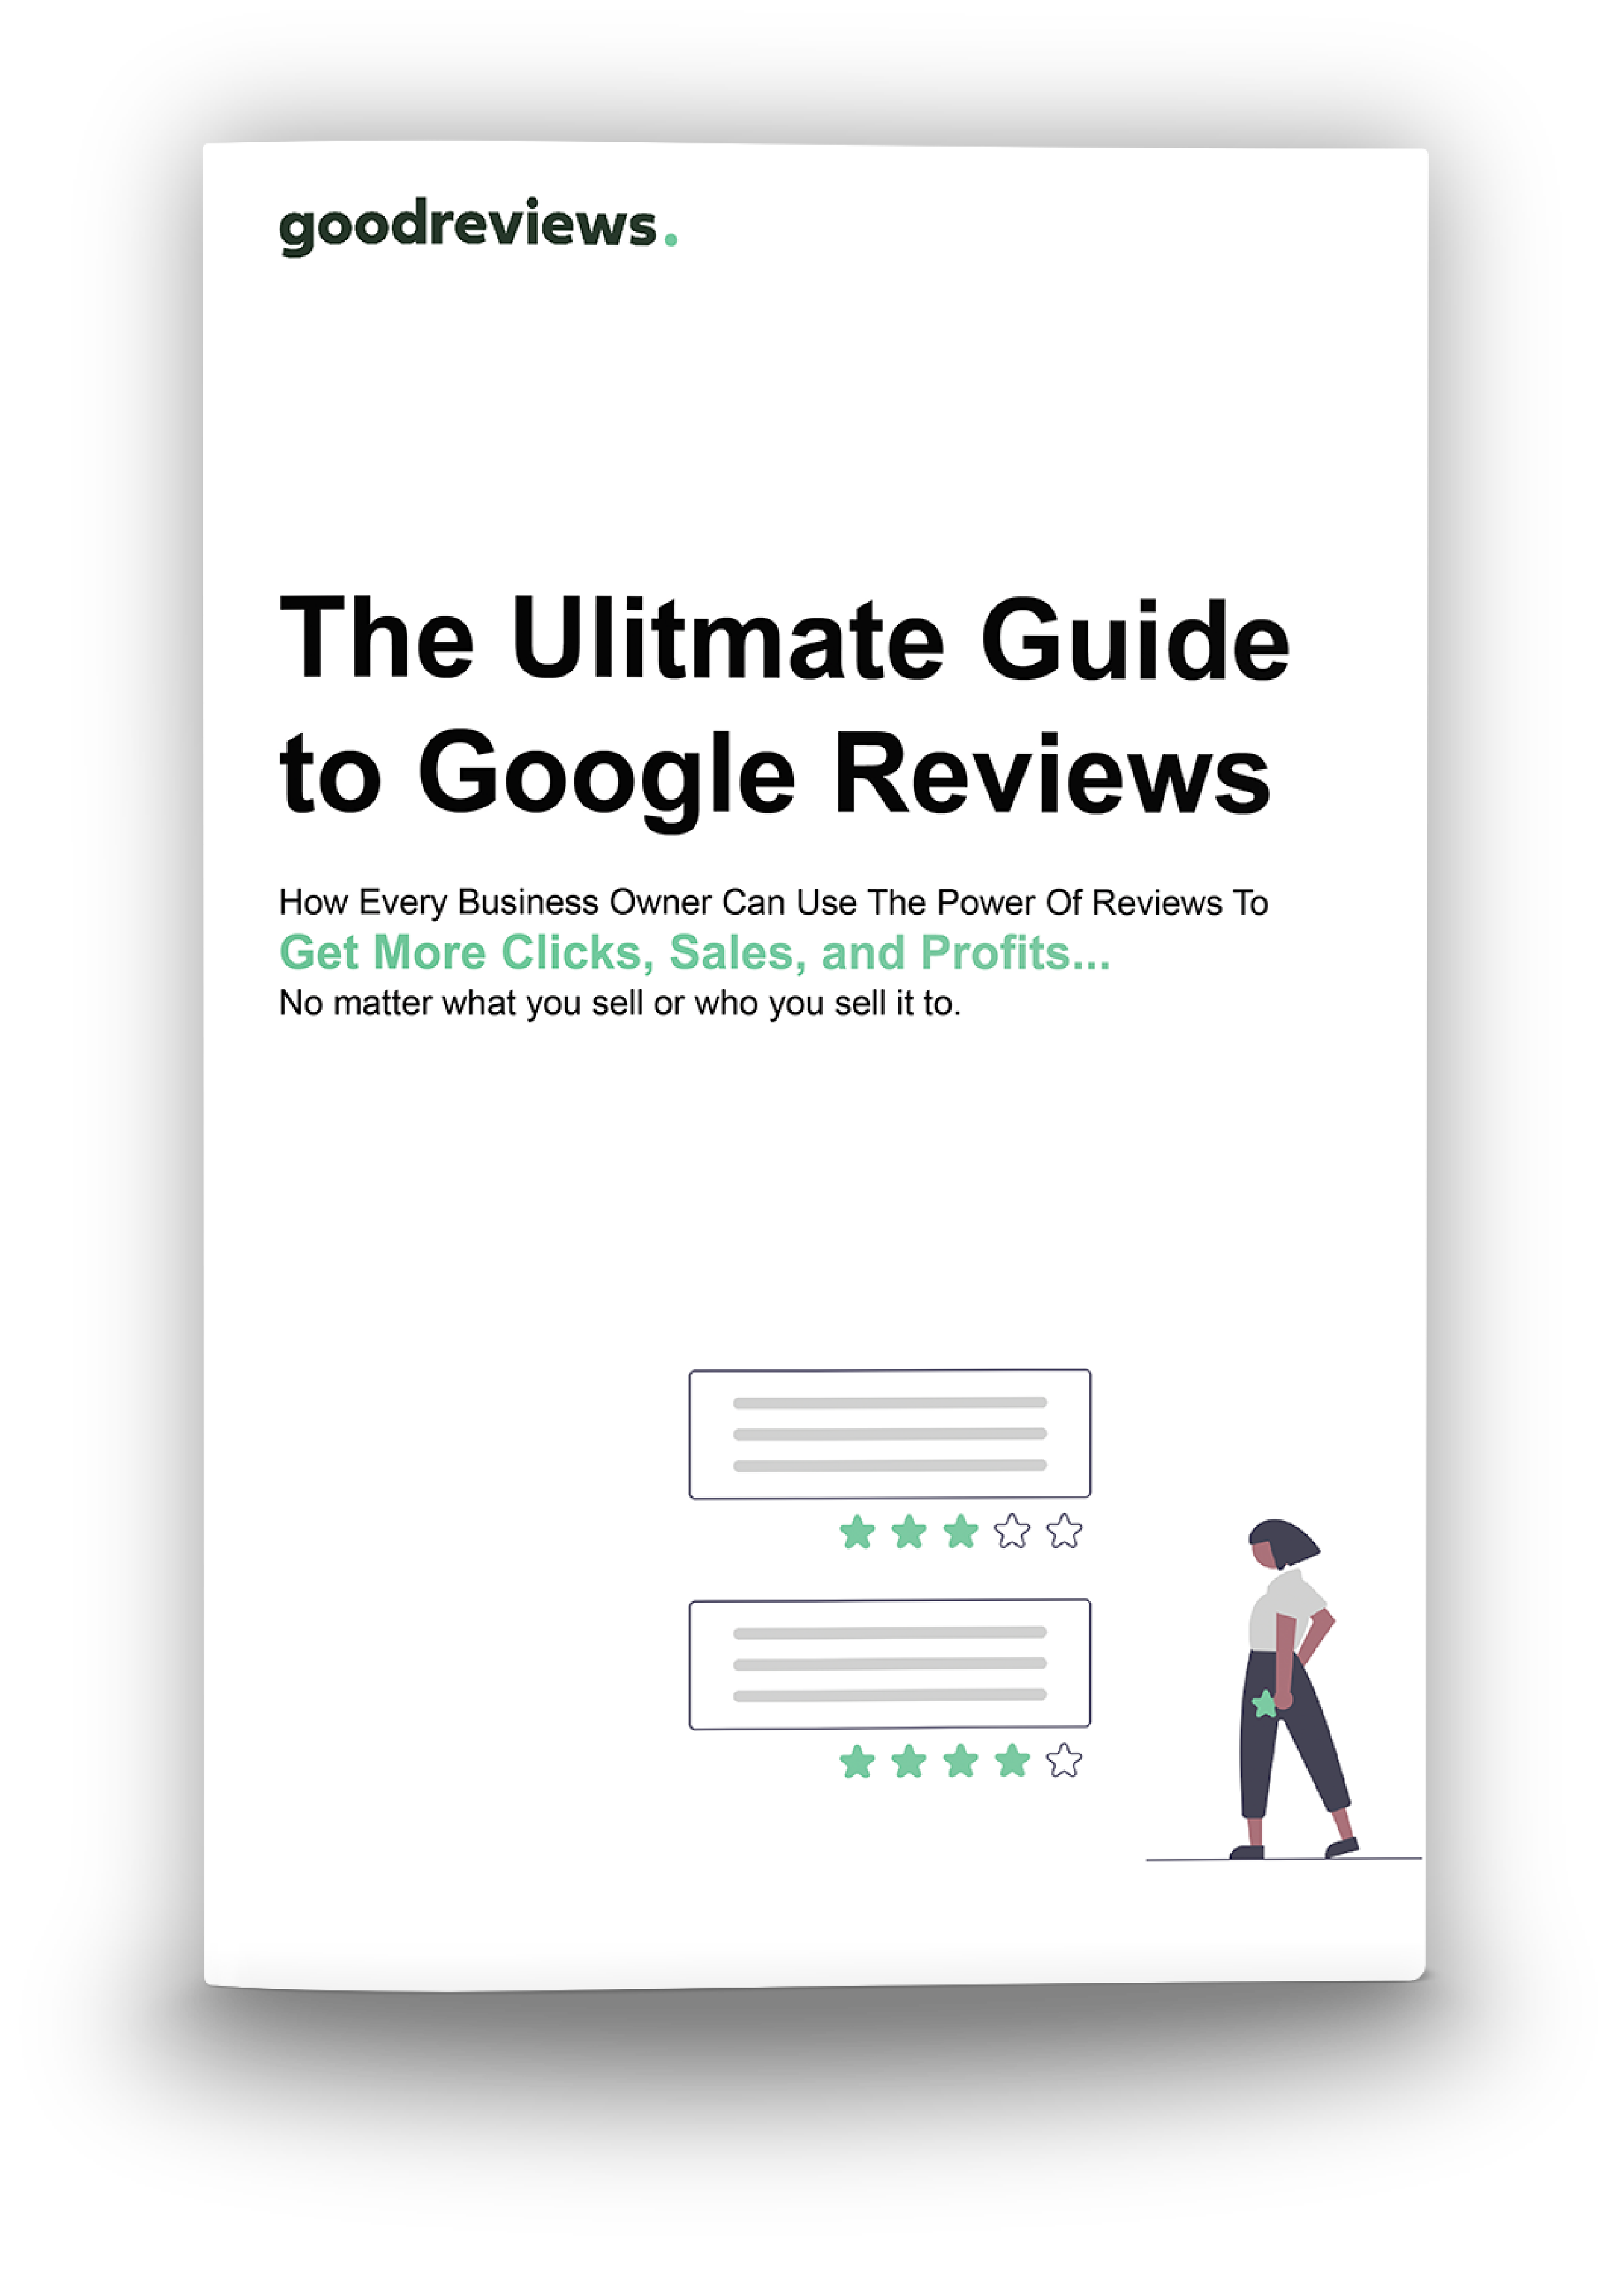 A book on Google Reviews